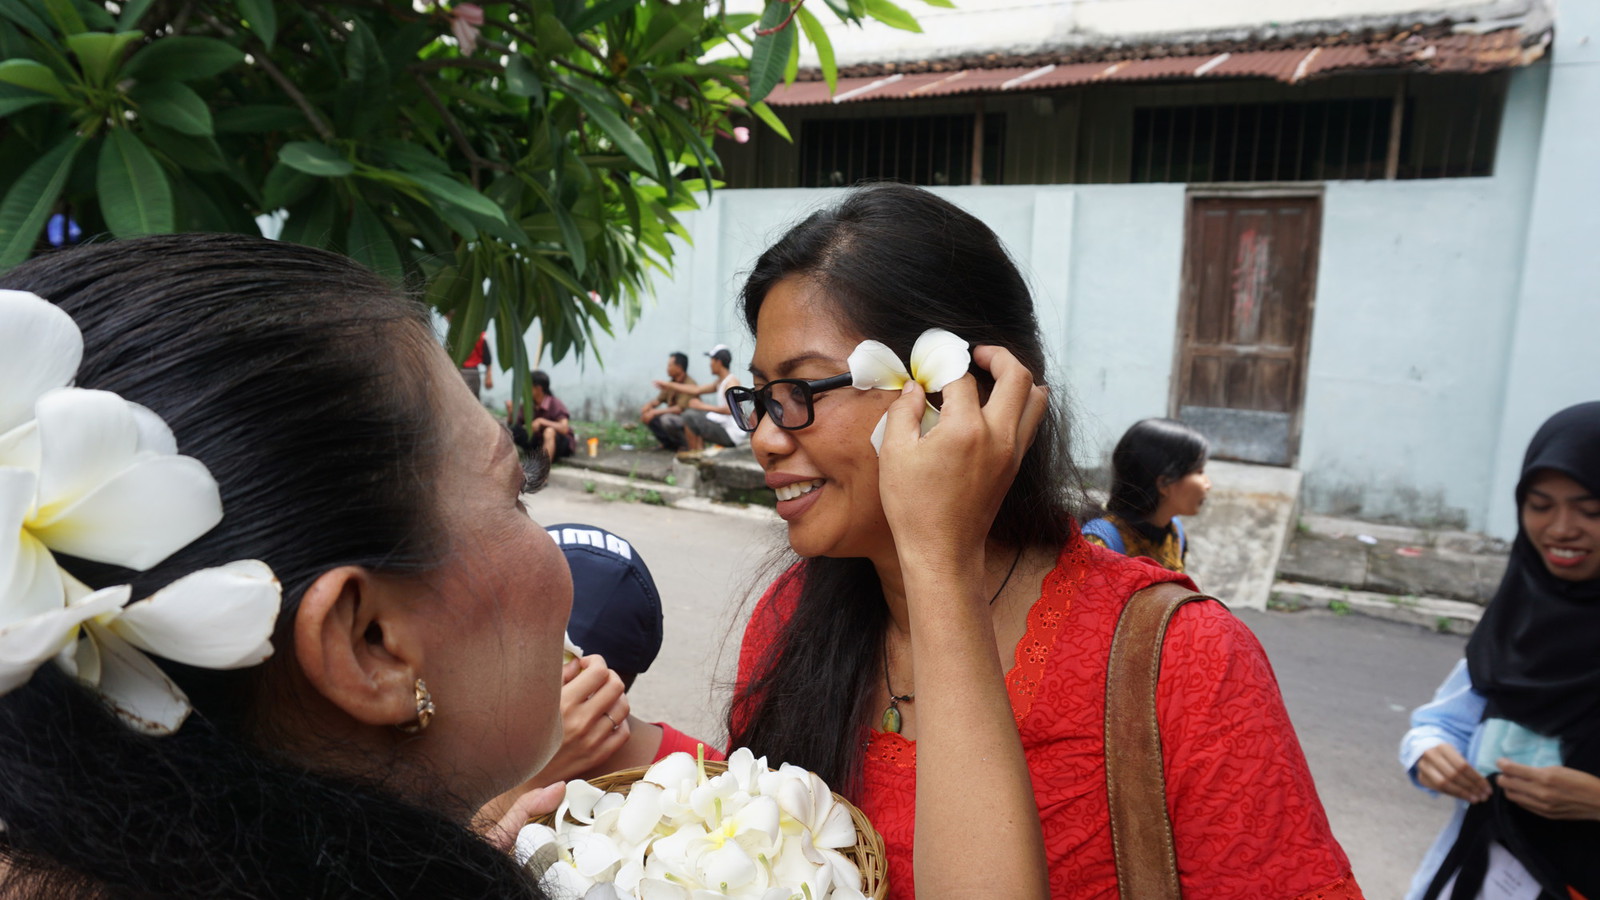 person putting flowers behind a person's ear